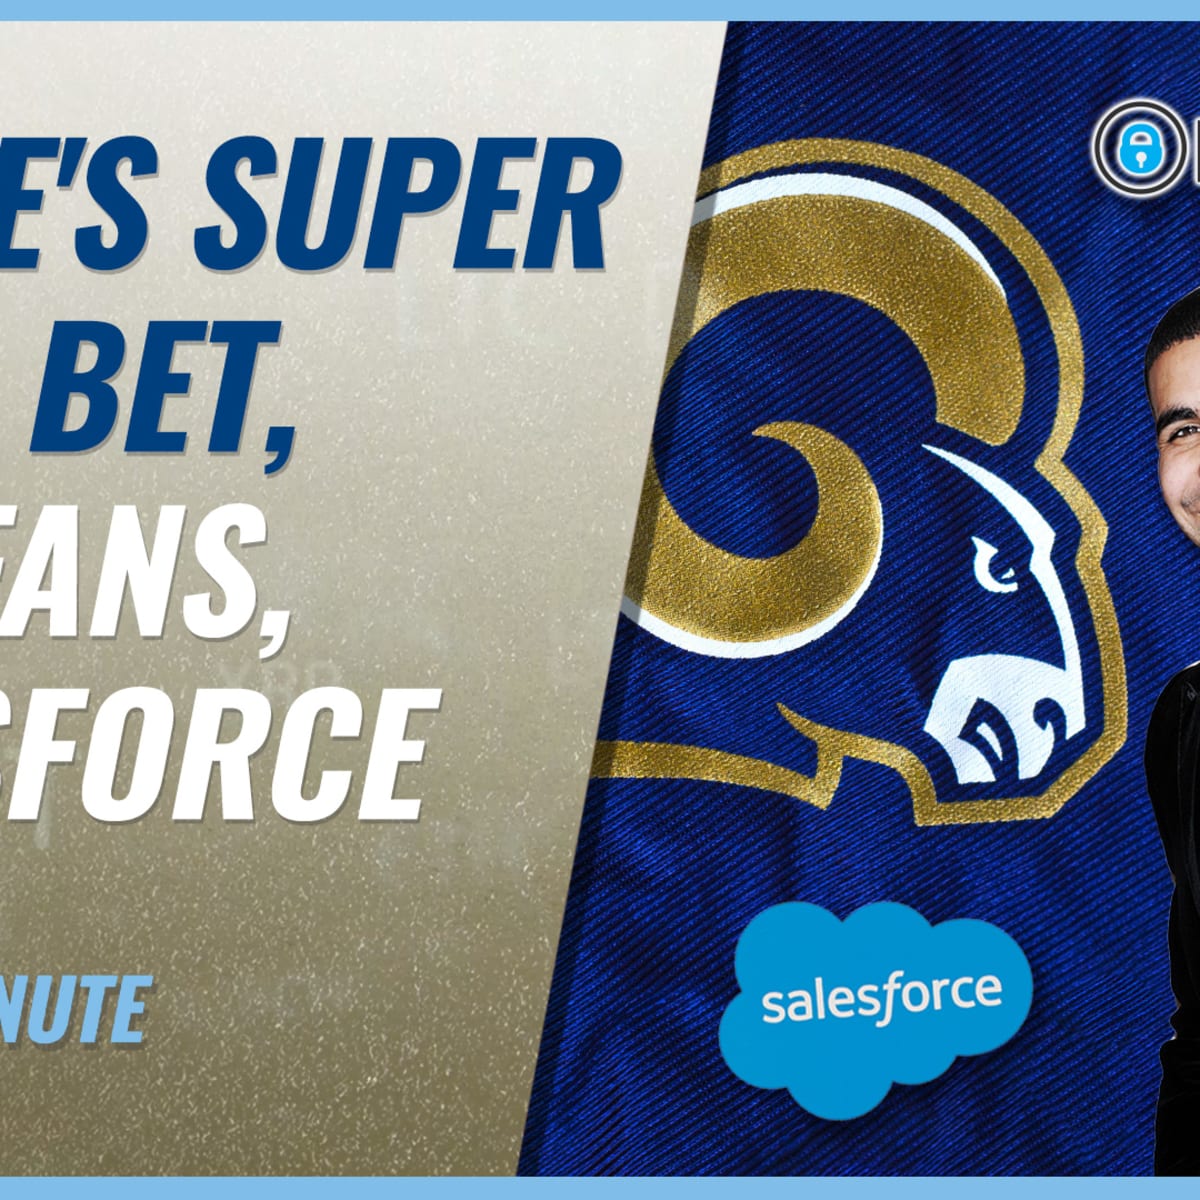 Drake Stakes His Crypto Coins On The Rams In The Super Bowl With